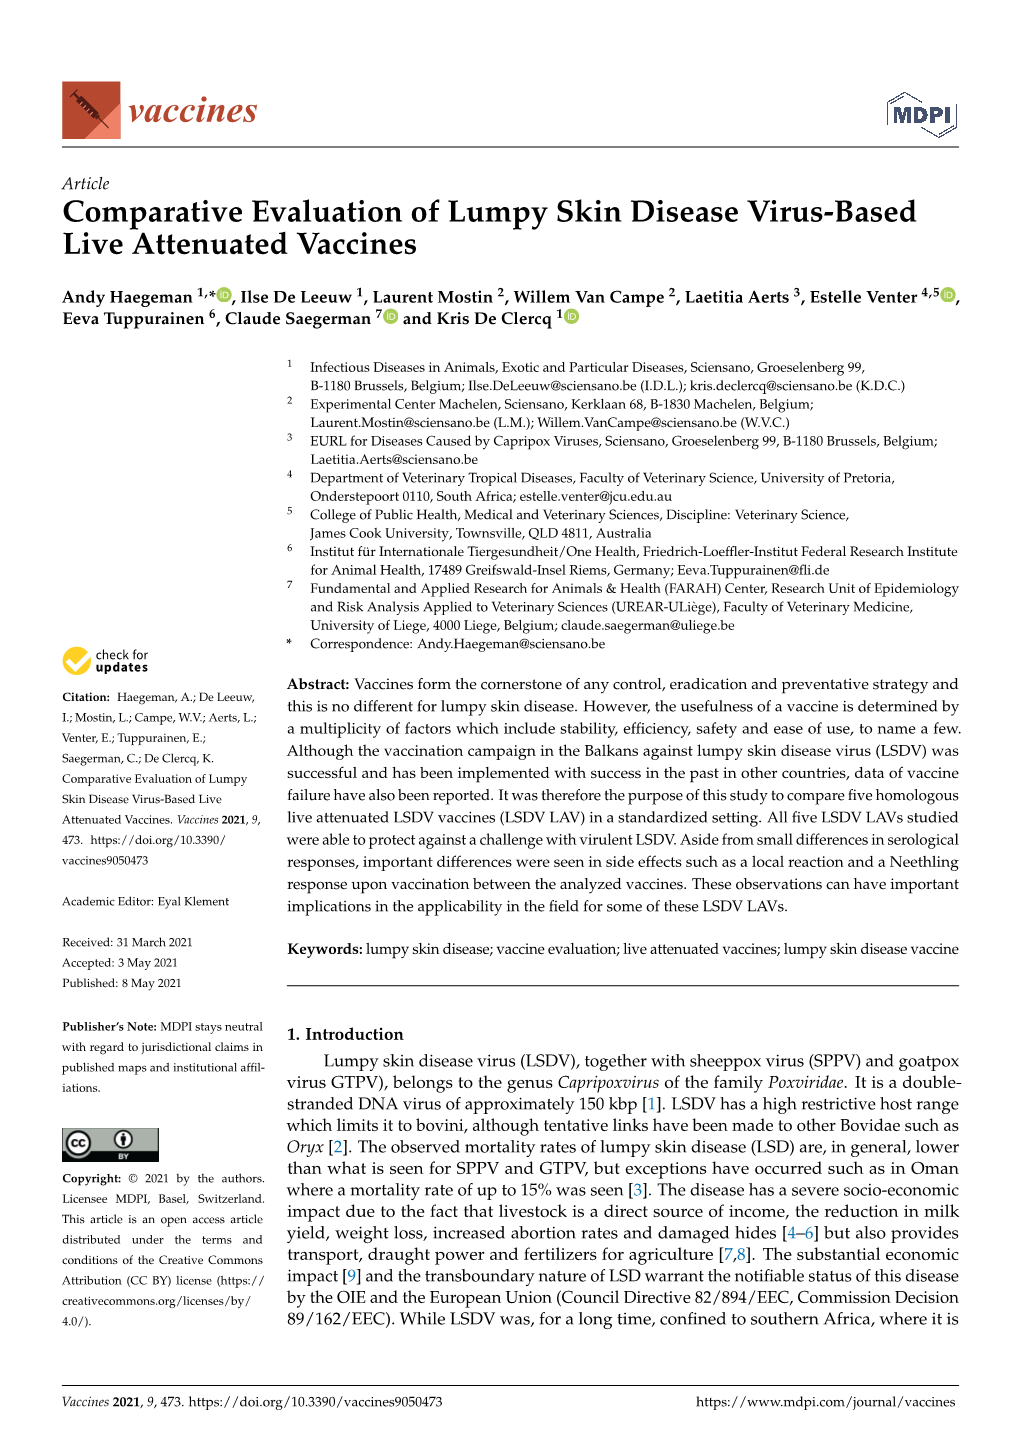 Comparative Evaluation of Lumpy Skin Disease Virus-Based Live Attenuated Vaccines